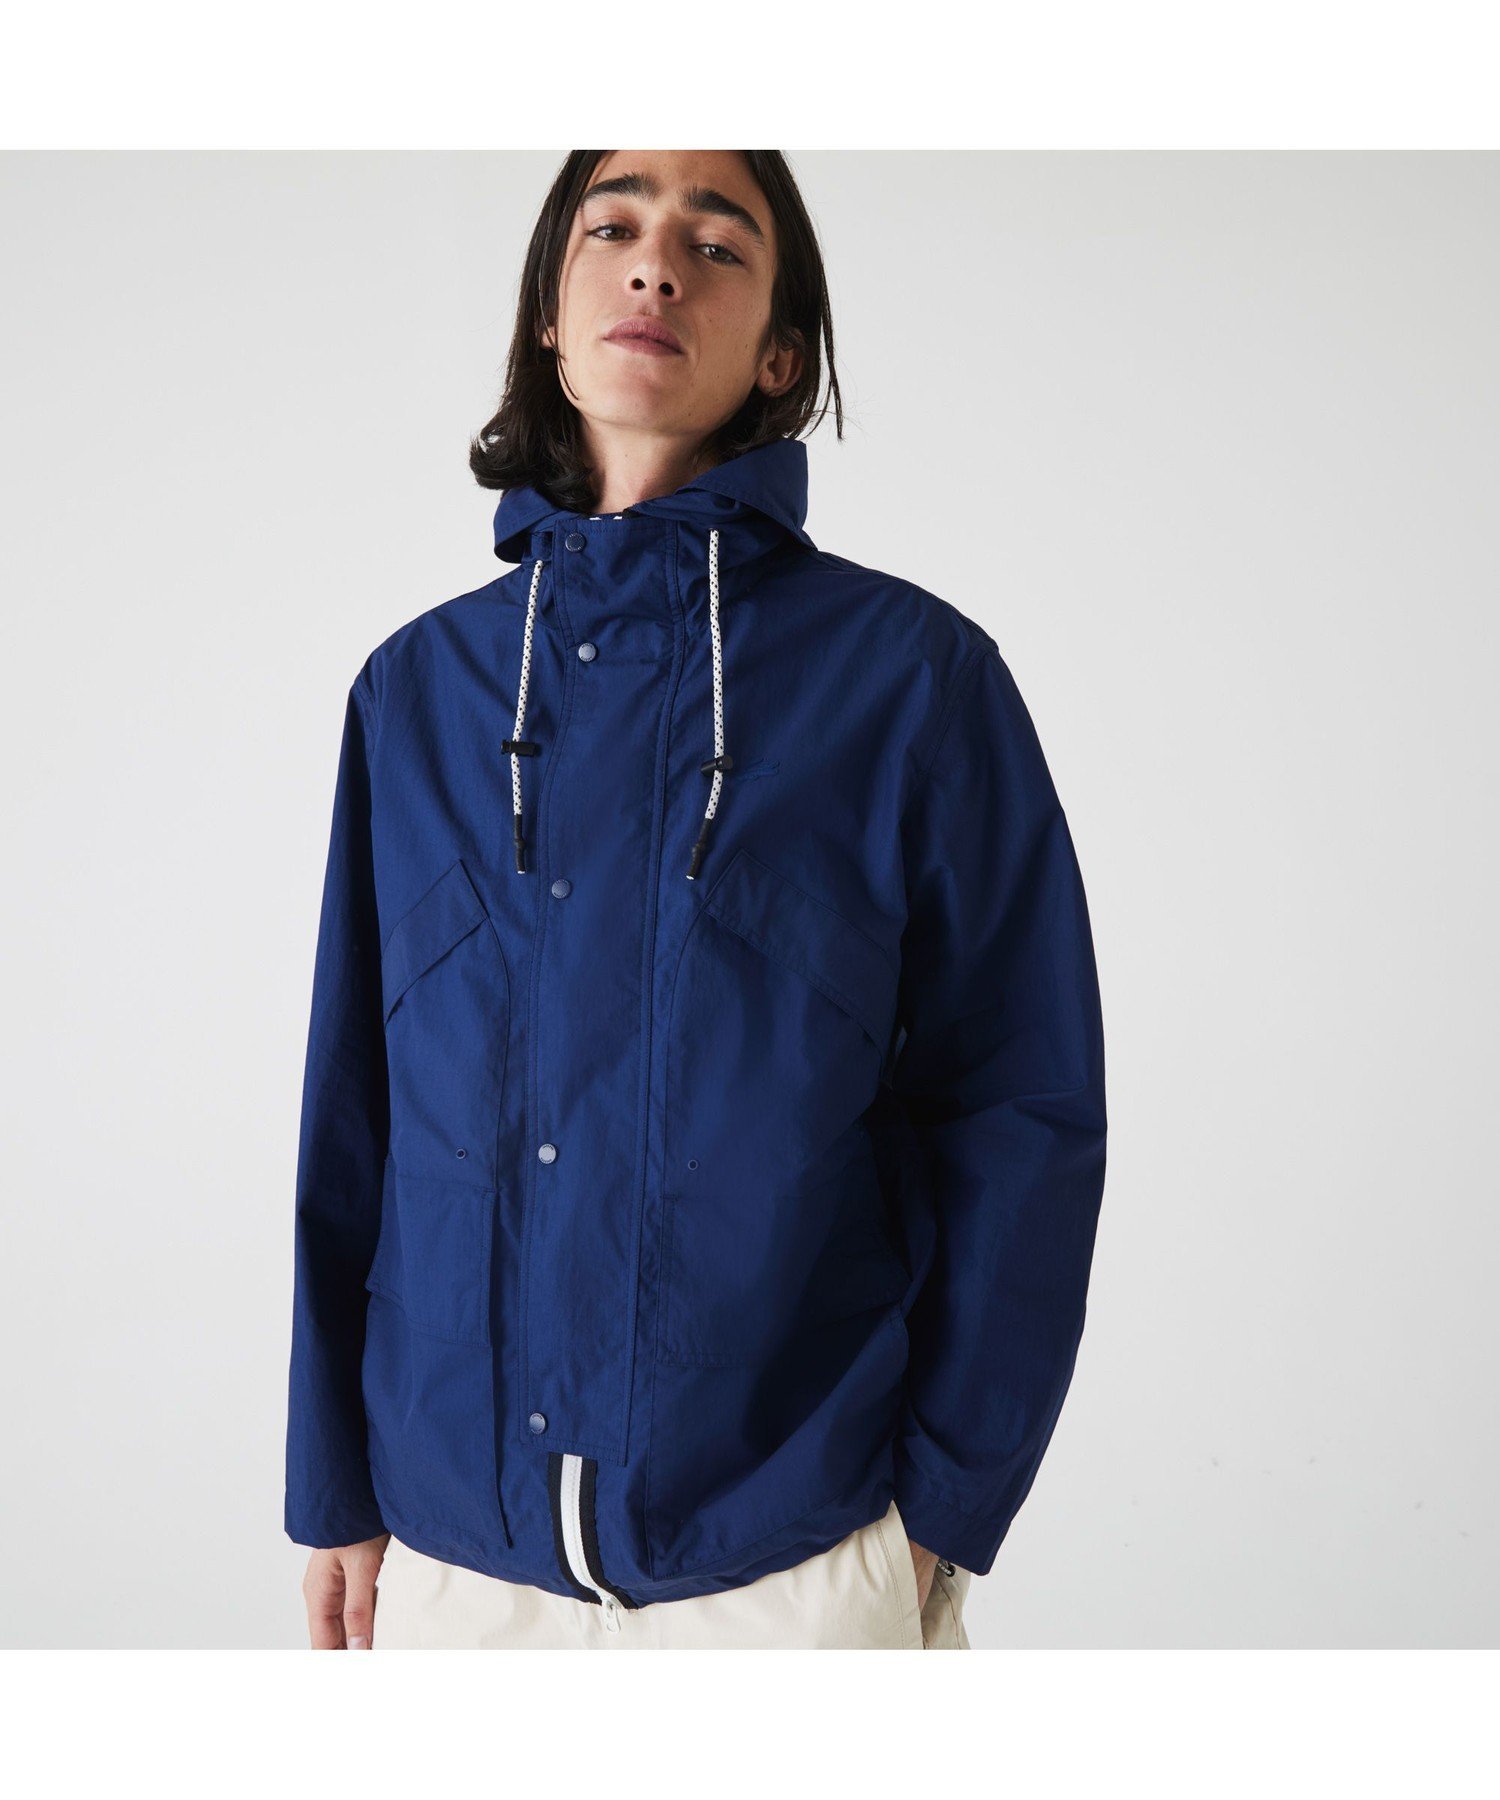 【SALE／30%OFF】LACOSTE マリンパーカ ラコステ カットソー パーカー ブルー【送料無料】